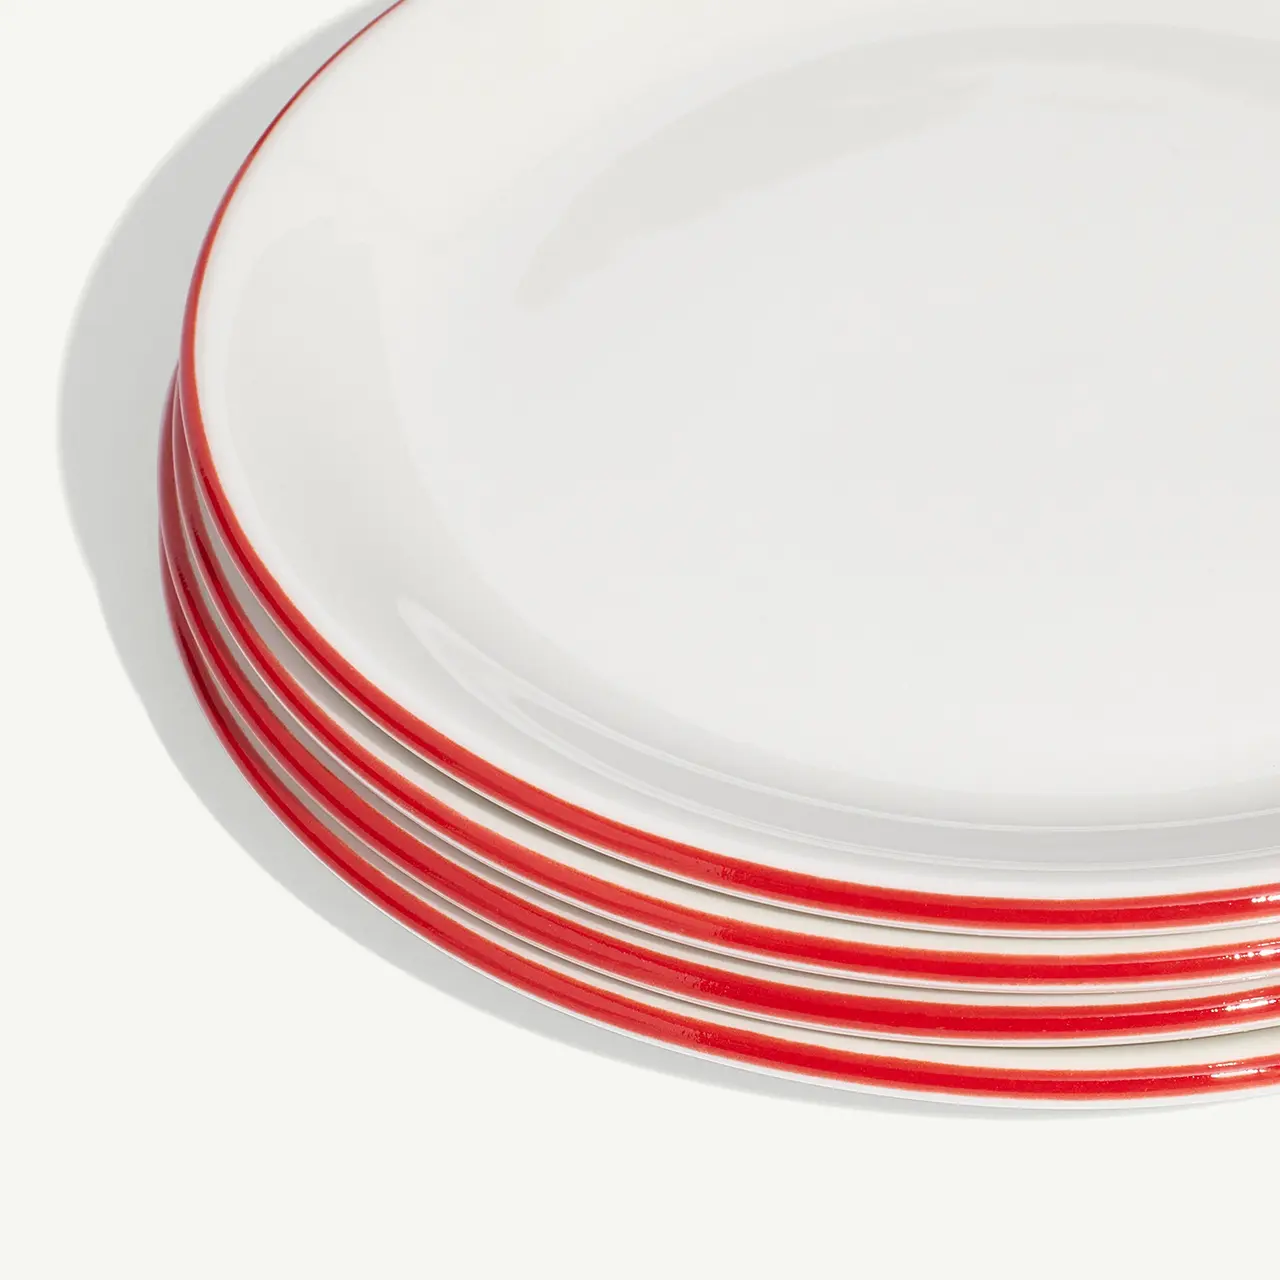 A stack of white plates with red trim on a light background.